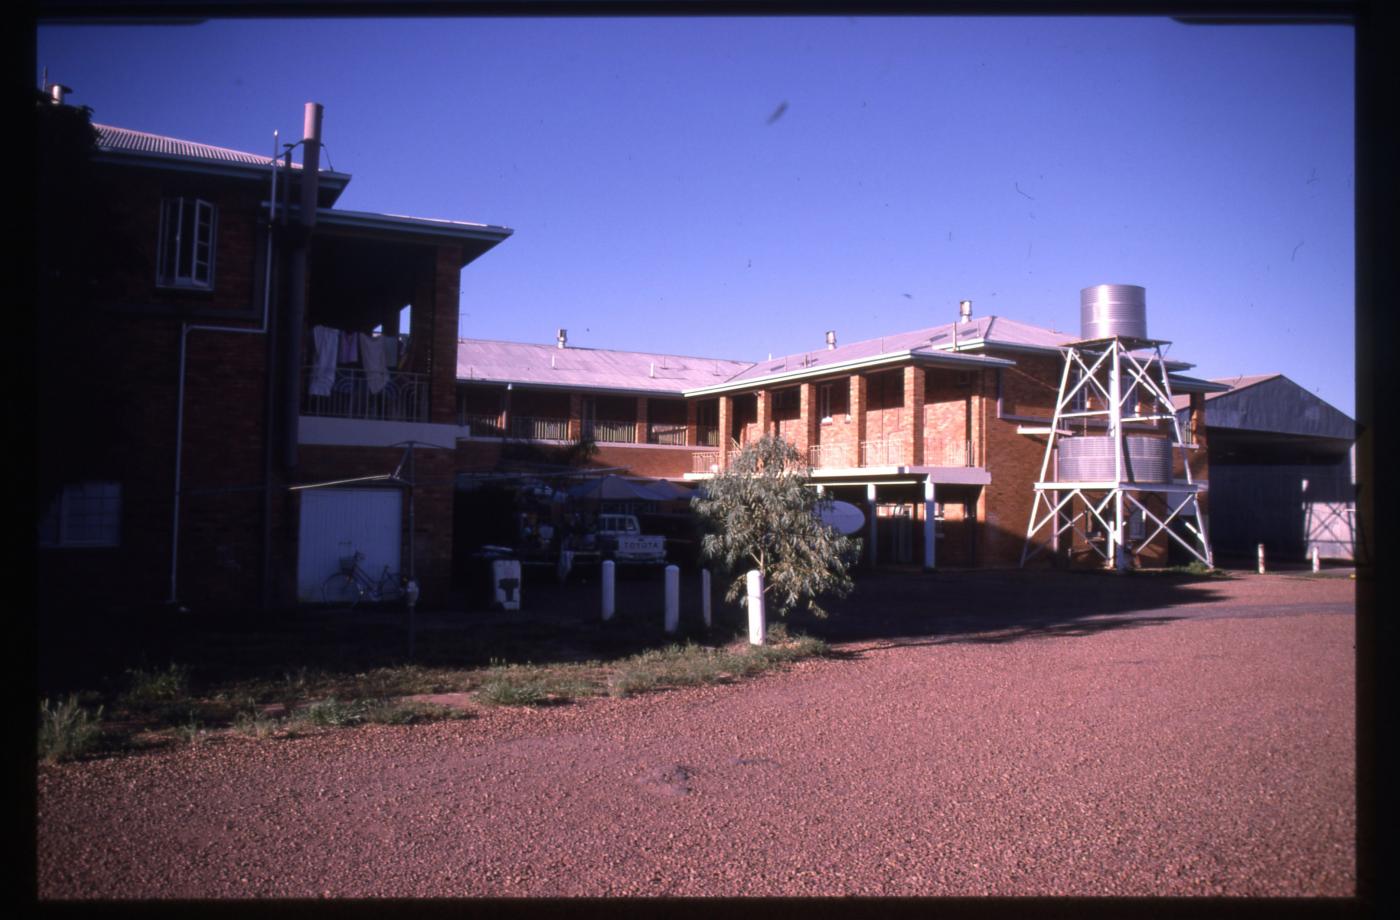 North Gregory Hotel - back view